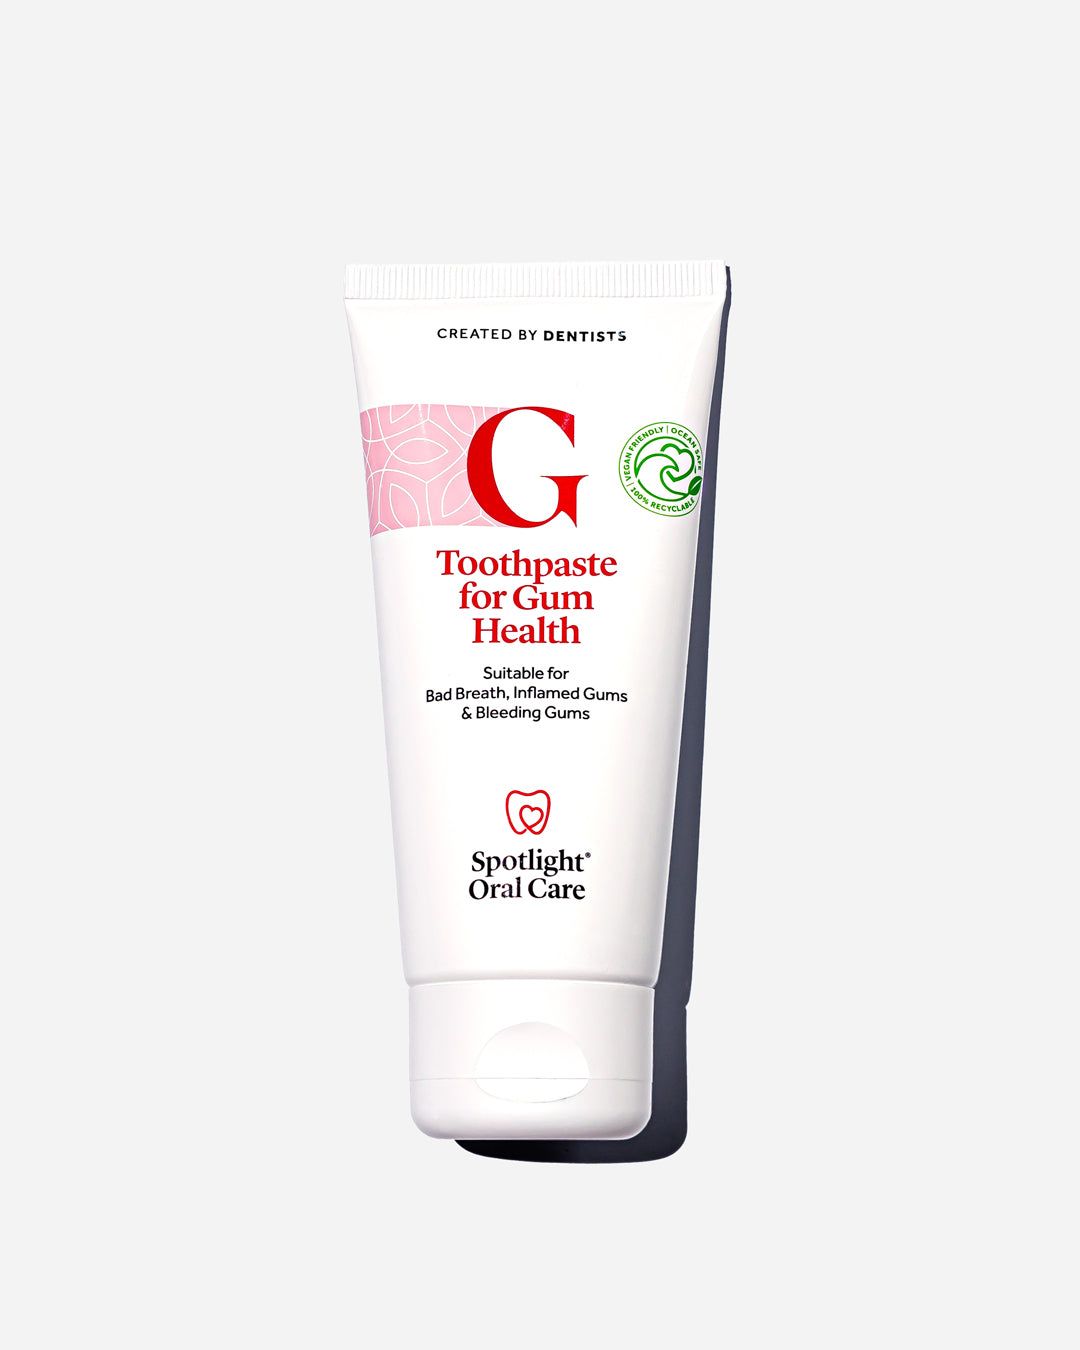 Toothpaste for Gum Health